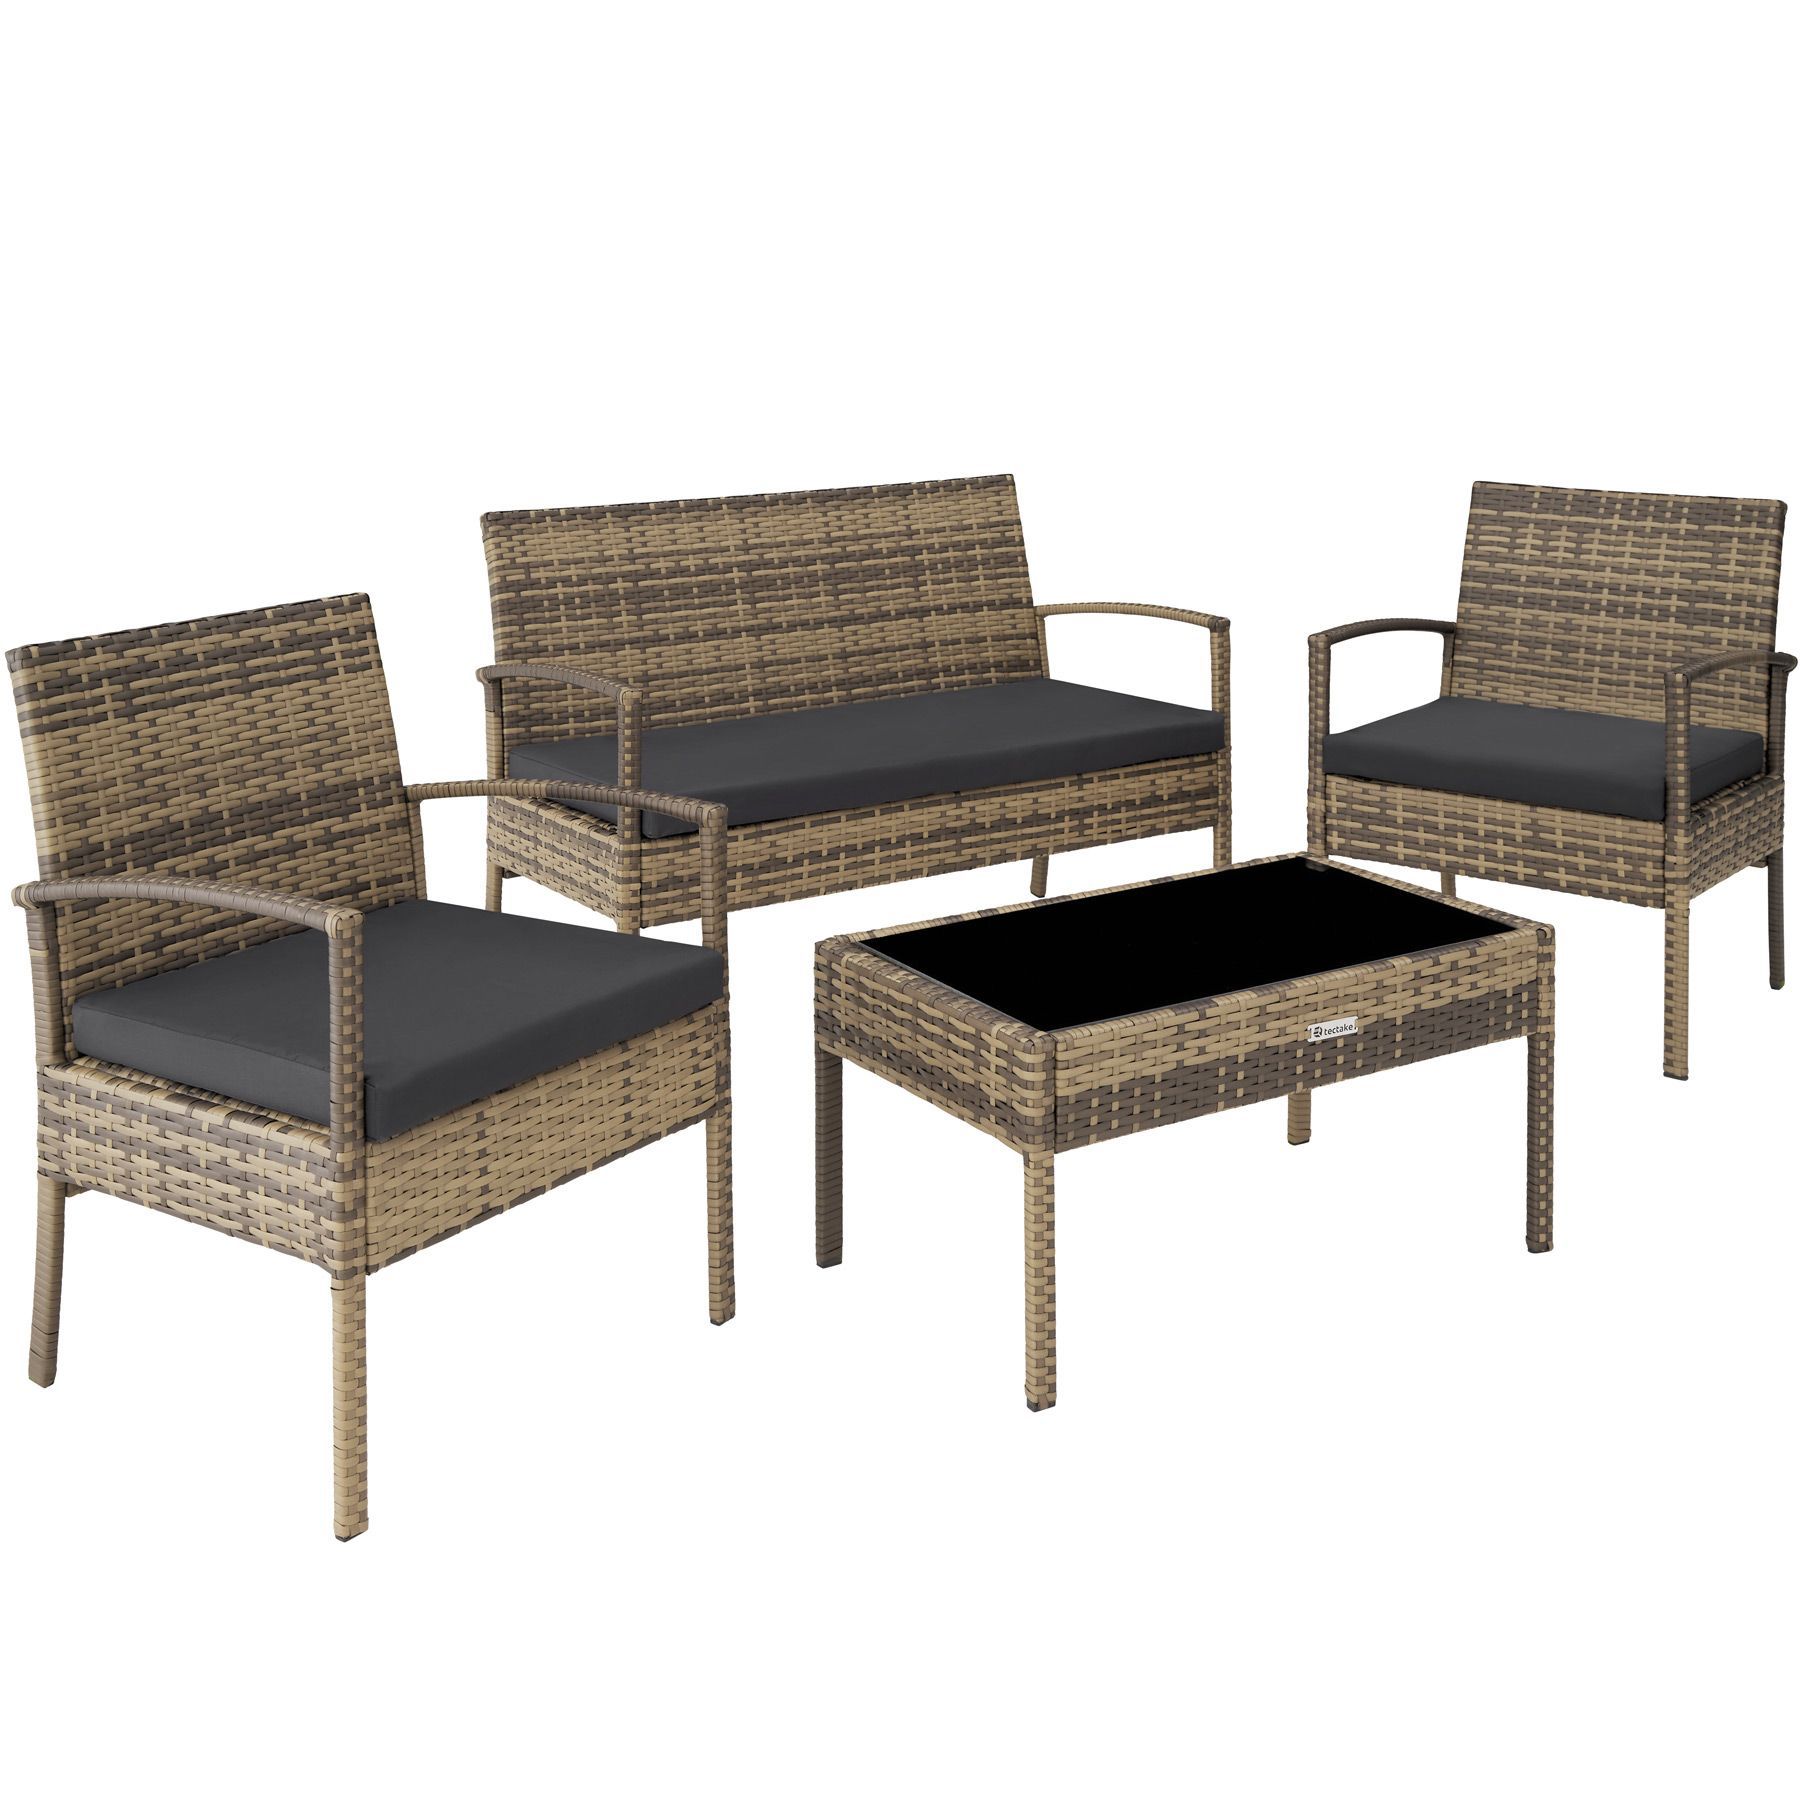 Poly Rattan Garden Furniture 2 Chairs Bench Table Set Outdoor Patio Within Natural Woven Modern Outdoor Chairs Sets (View 8 of 15)